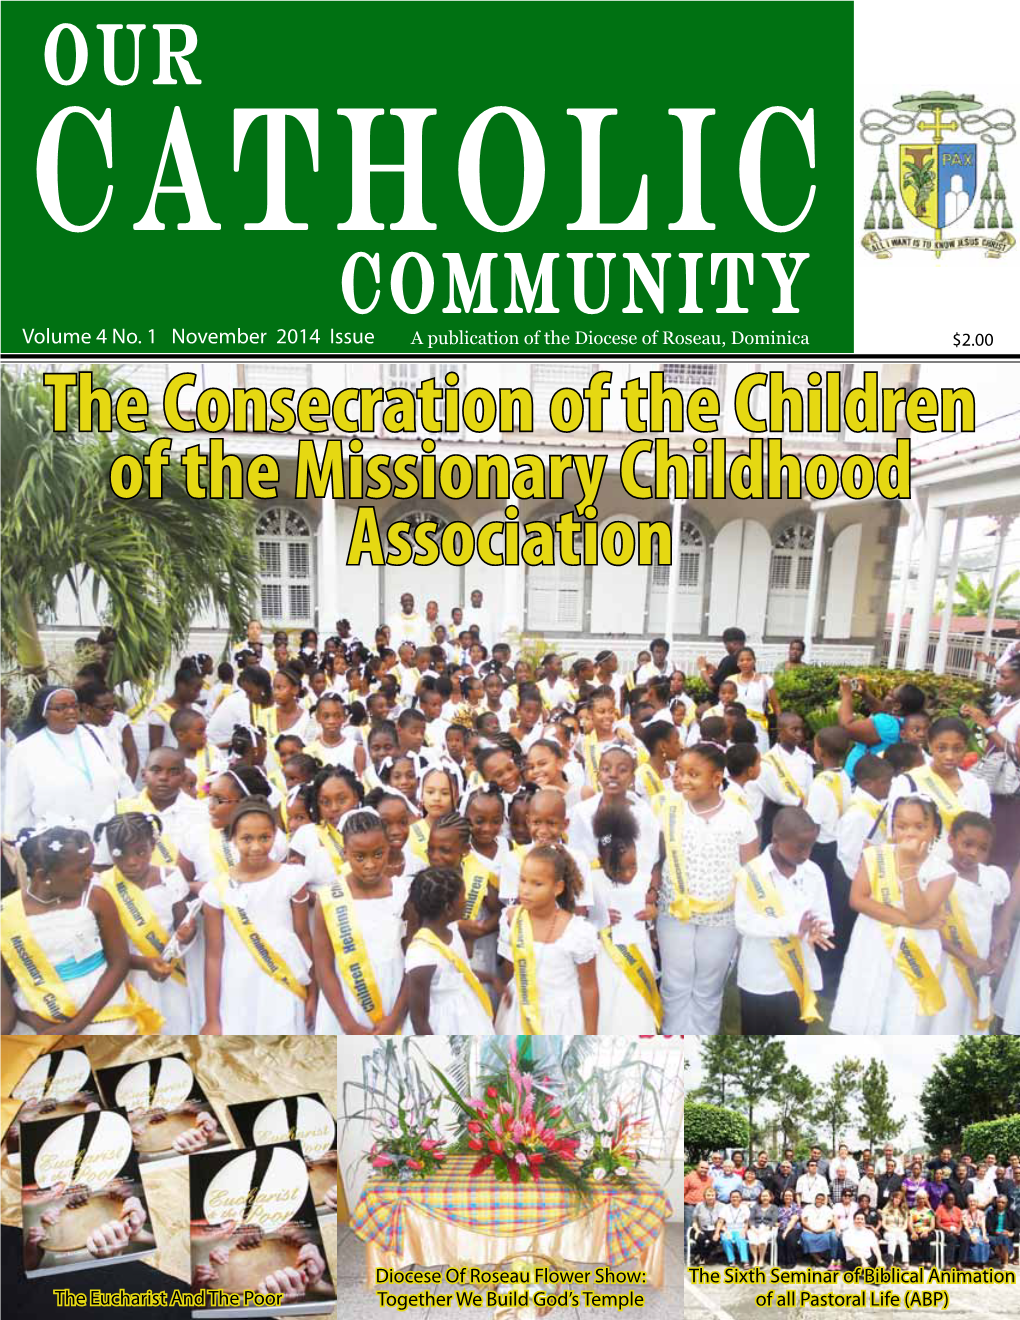 The Consecration of the Children of the Missionary Childhood Association